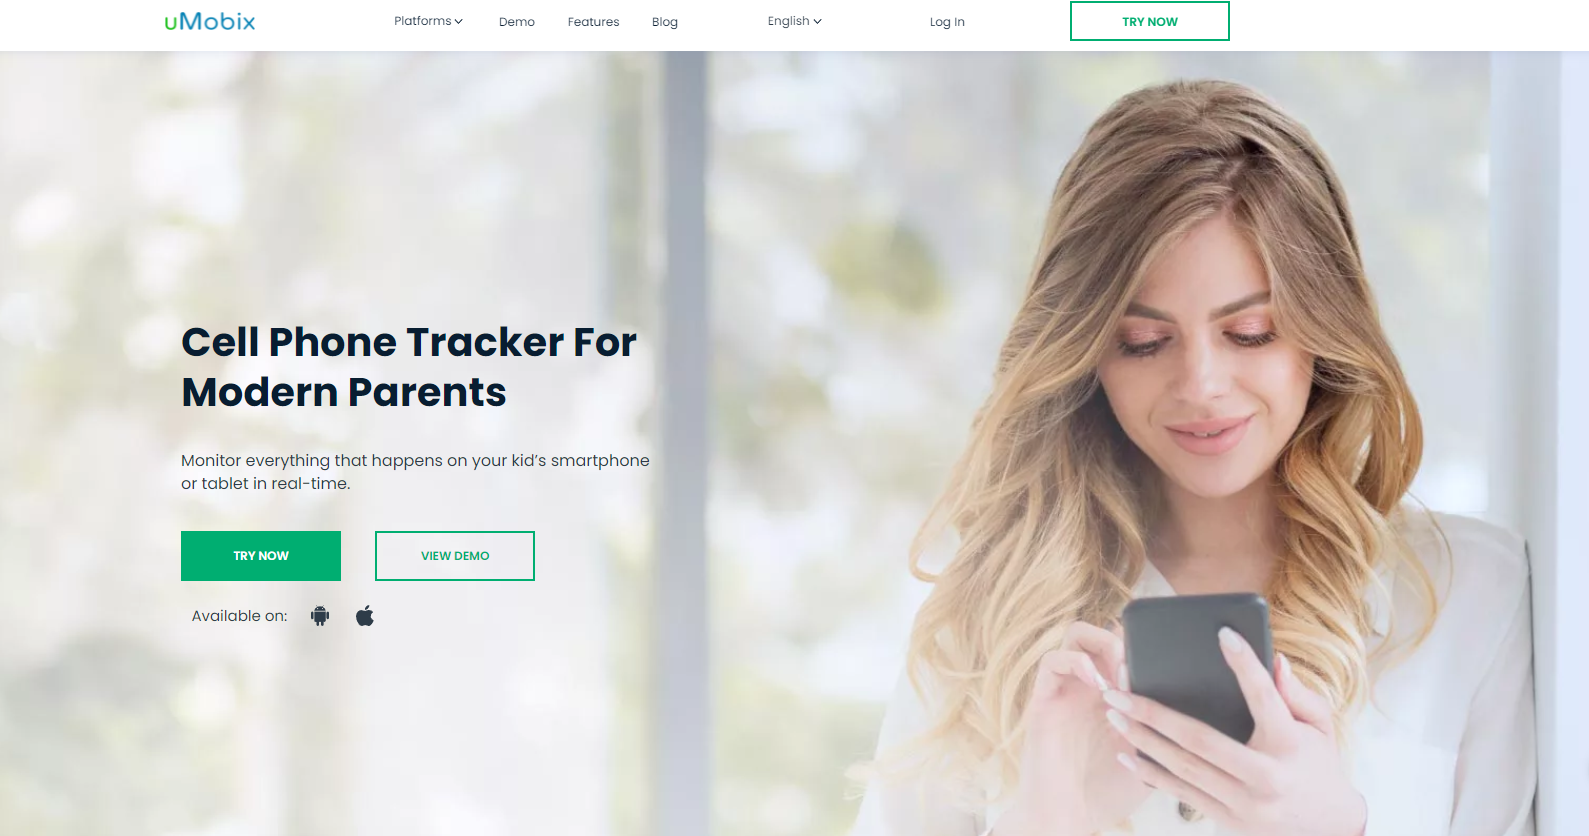 The uMobix cell phone tracker for kids' safety